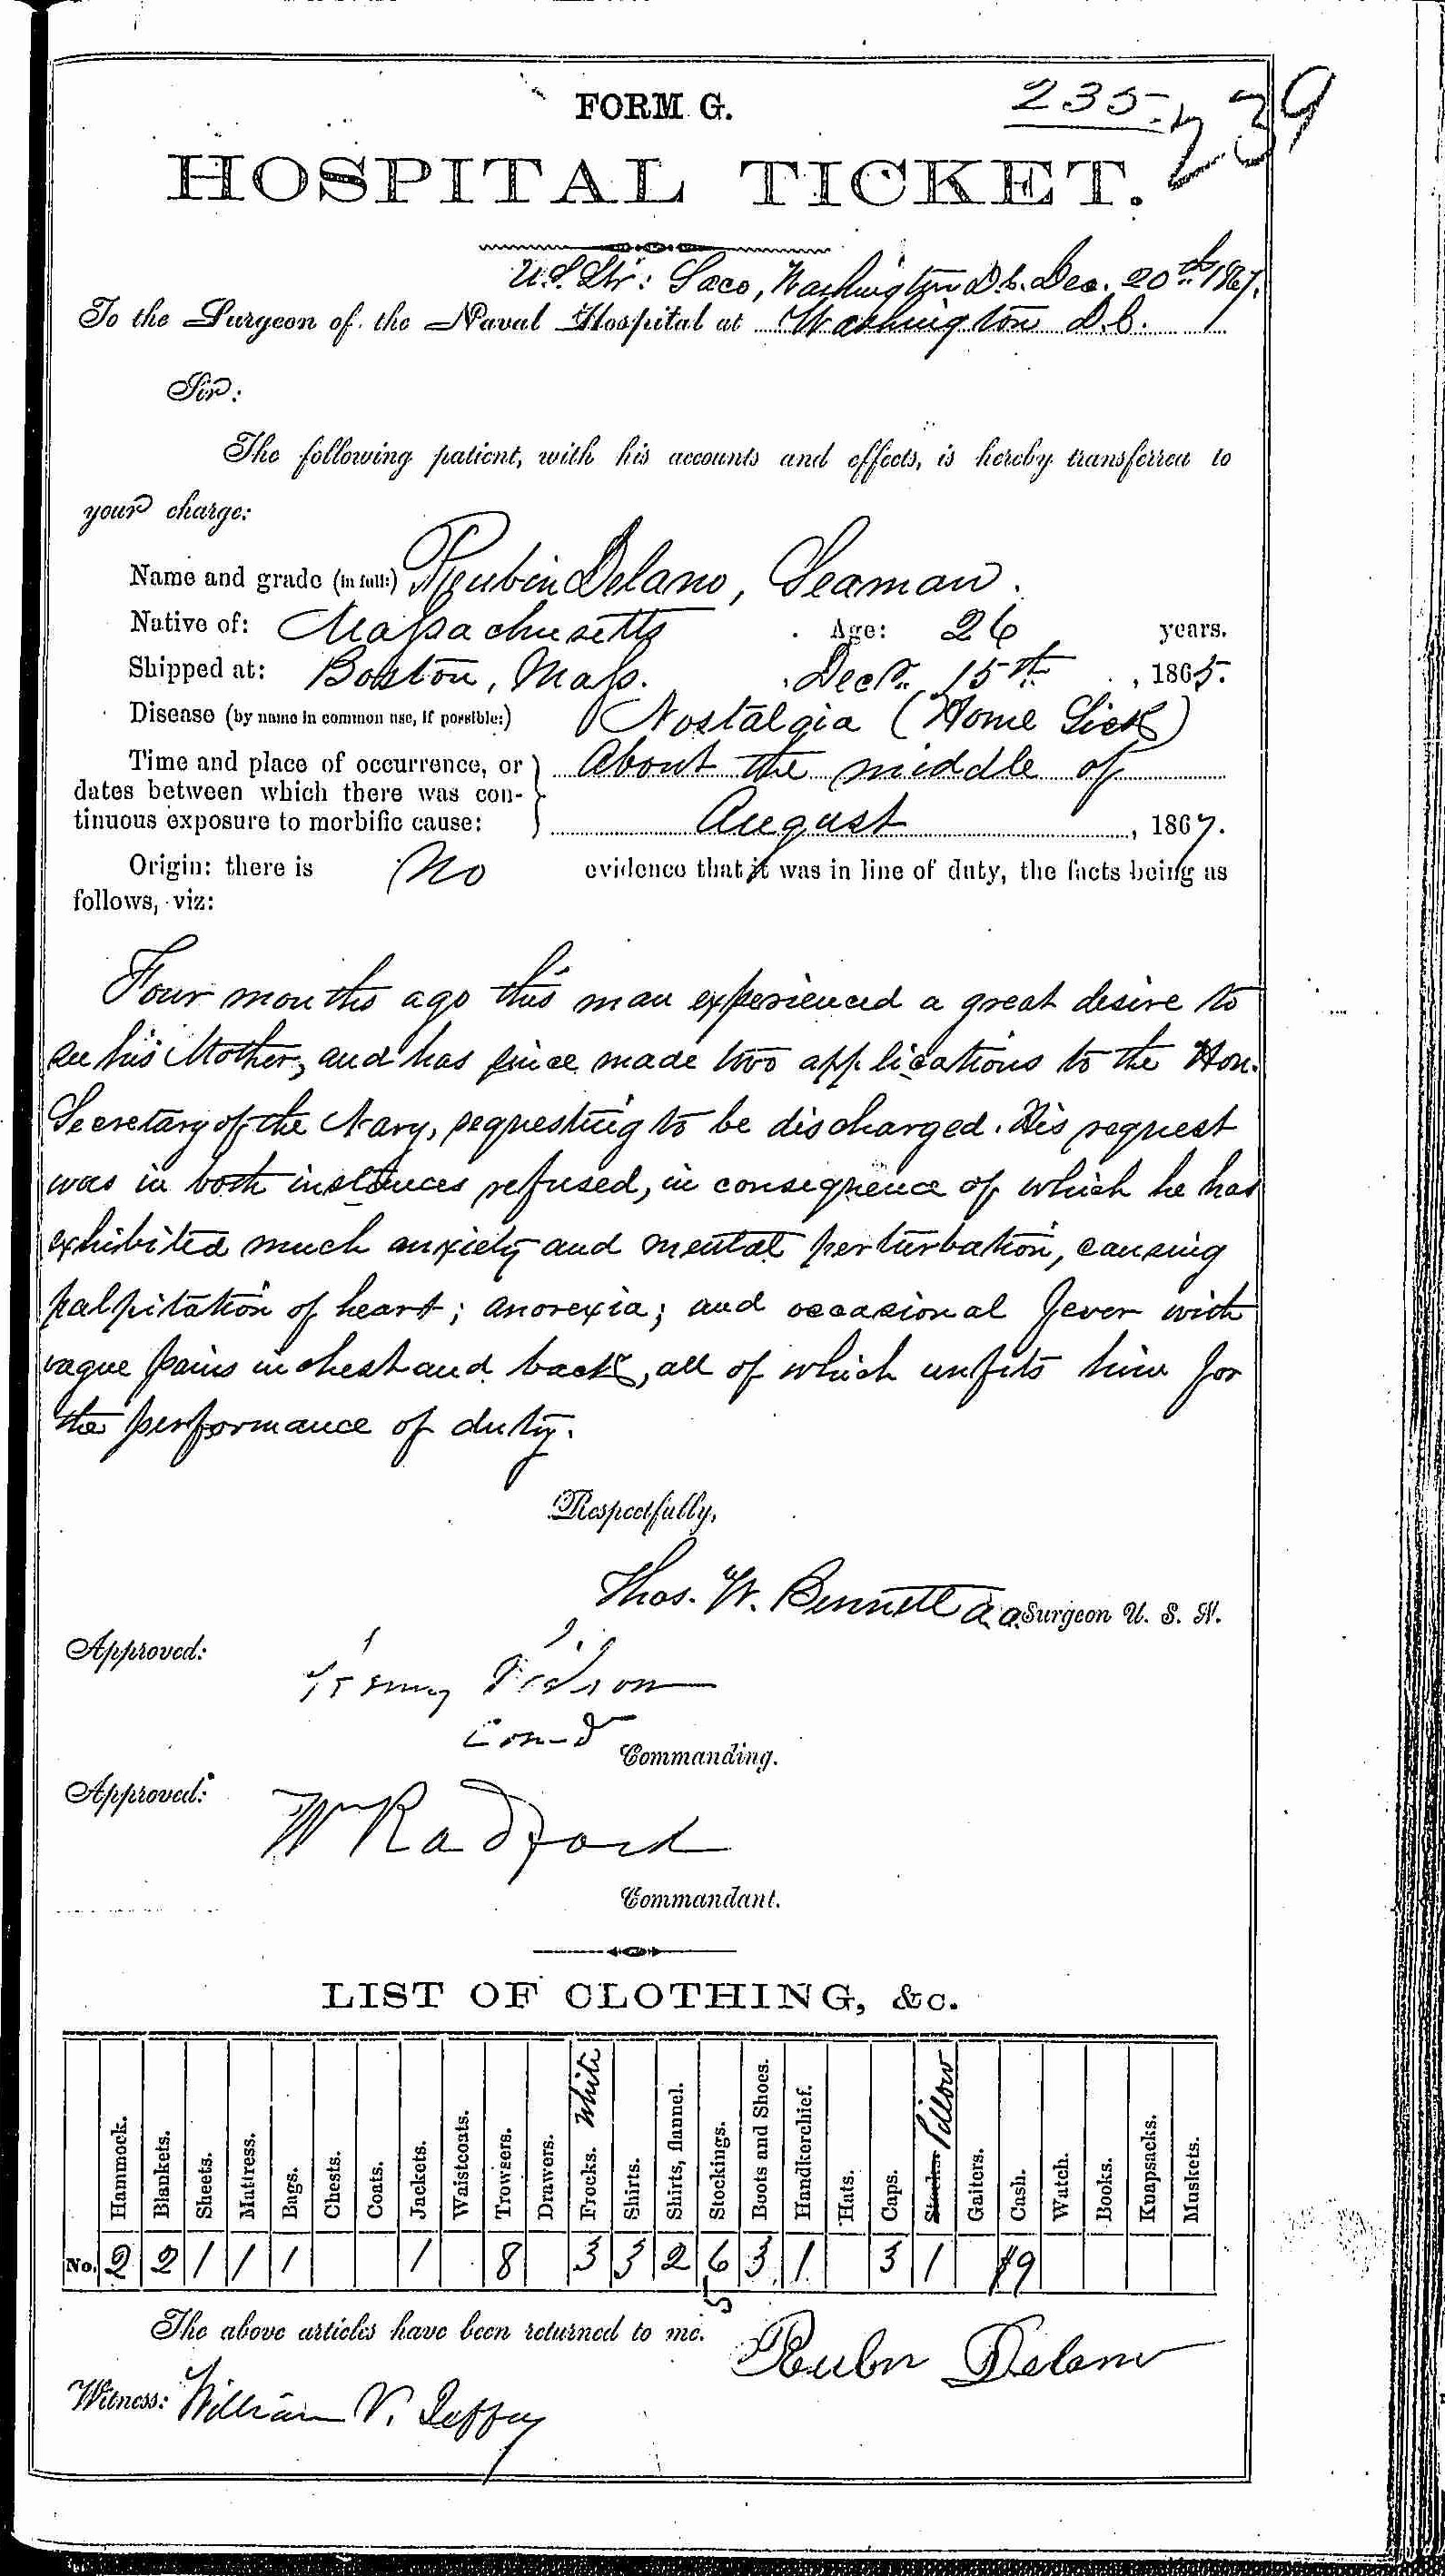 Entry for Reubin Delano (page 1 of 2) in the log Hospital Tickets and Case Papers - Naval Hospital - Washington, D.C. - 1866-68